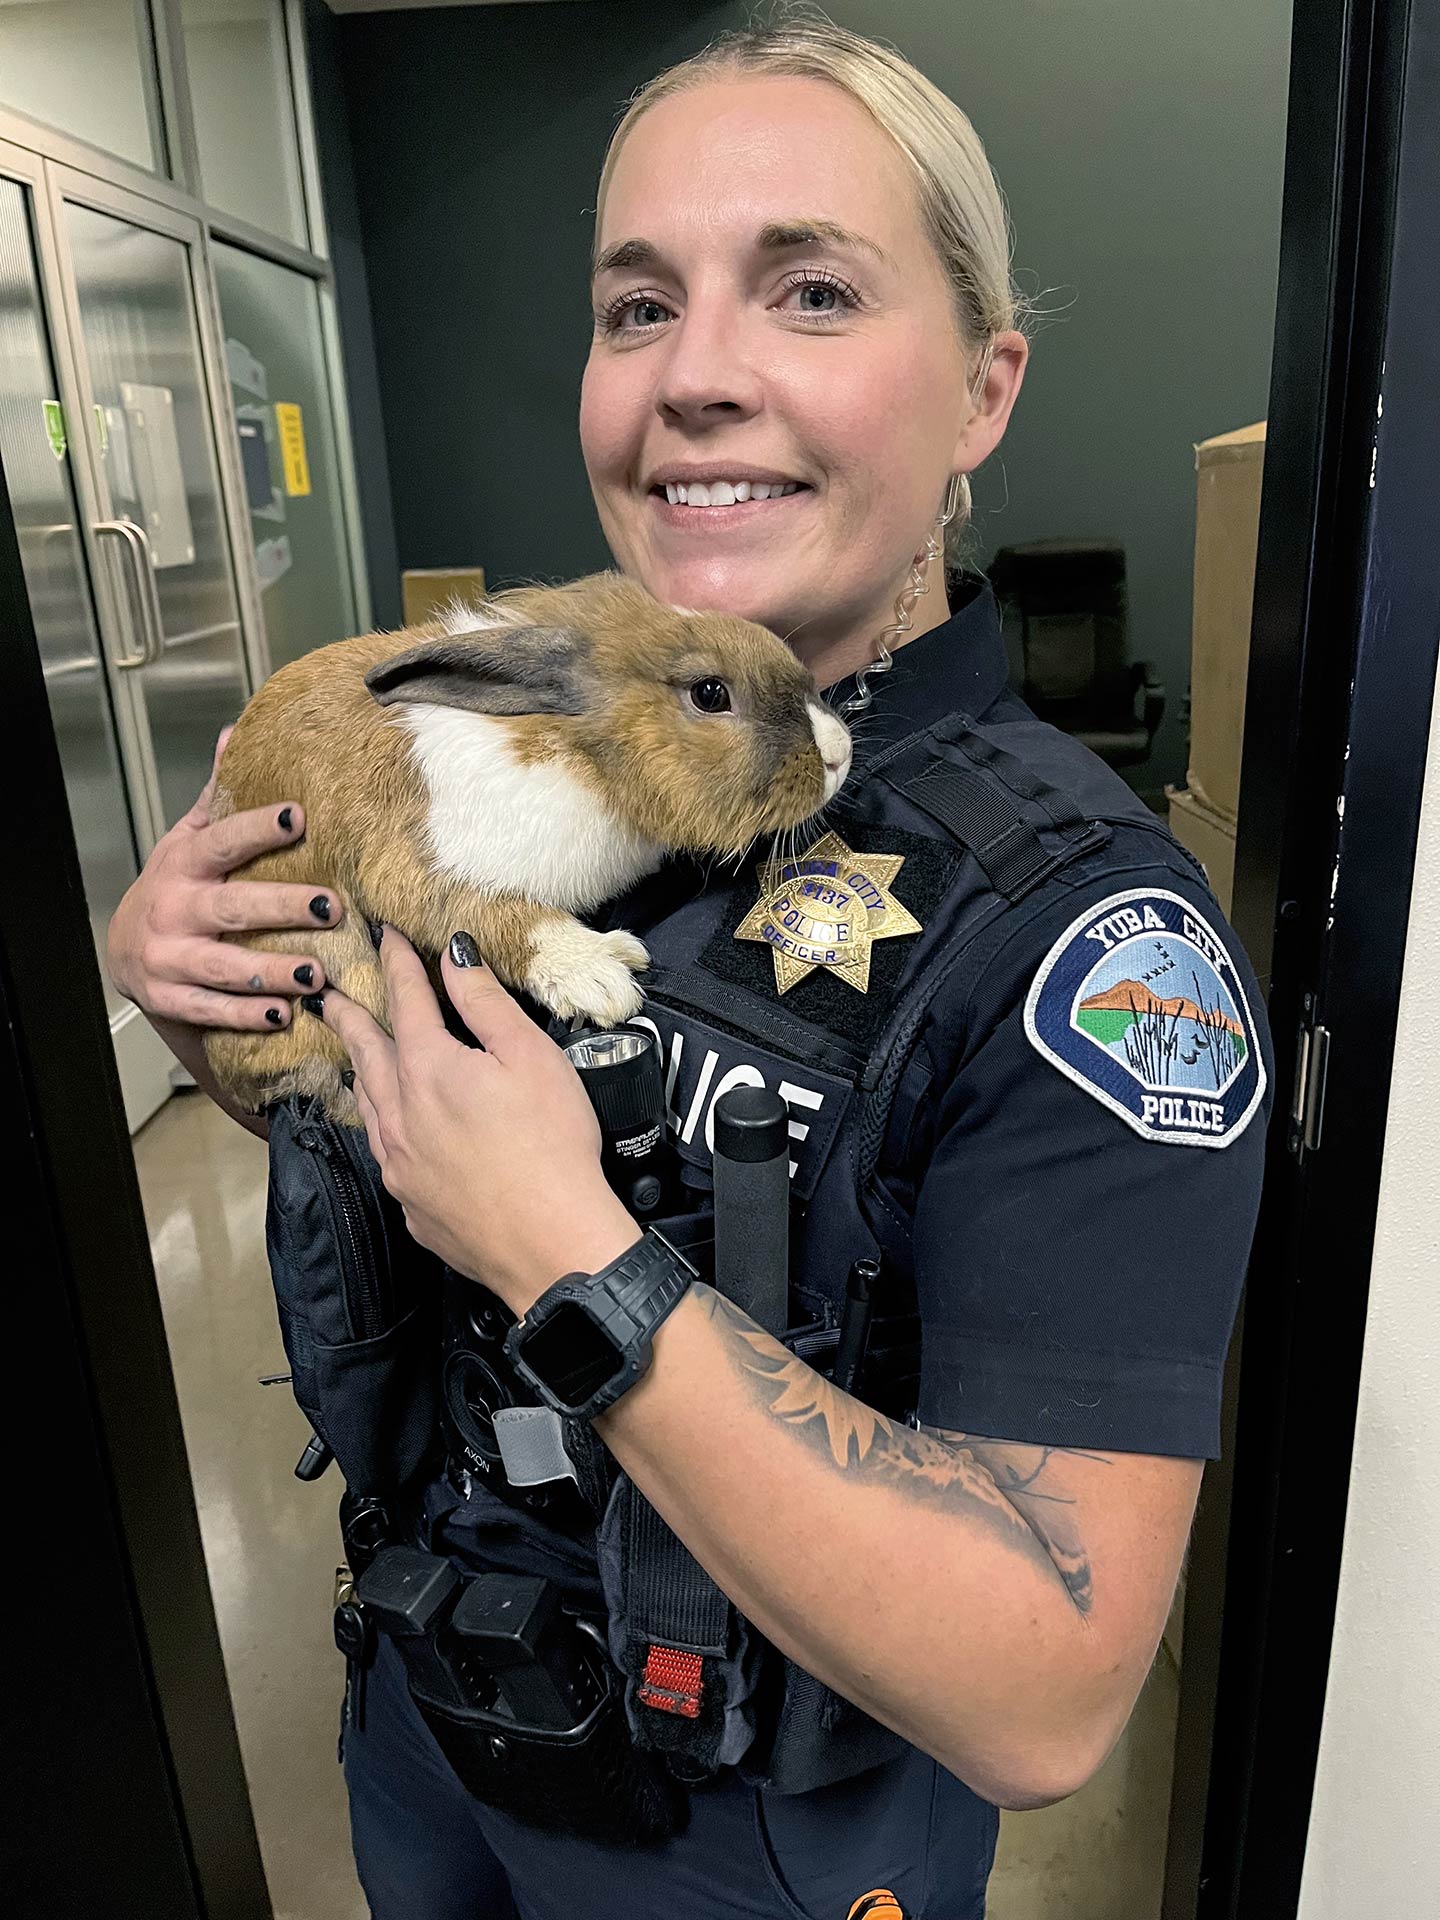 Officer-Ashley-Carson-holding-Percy-the-Support-Rabbit-on-the-night-she-found-him-yuba-city-police-department-ycpd